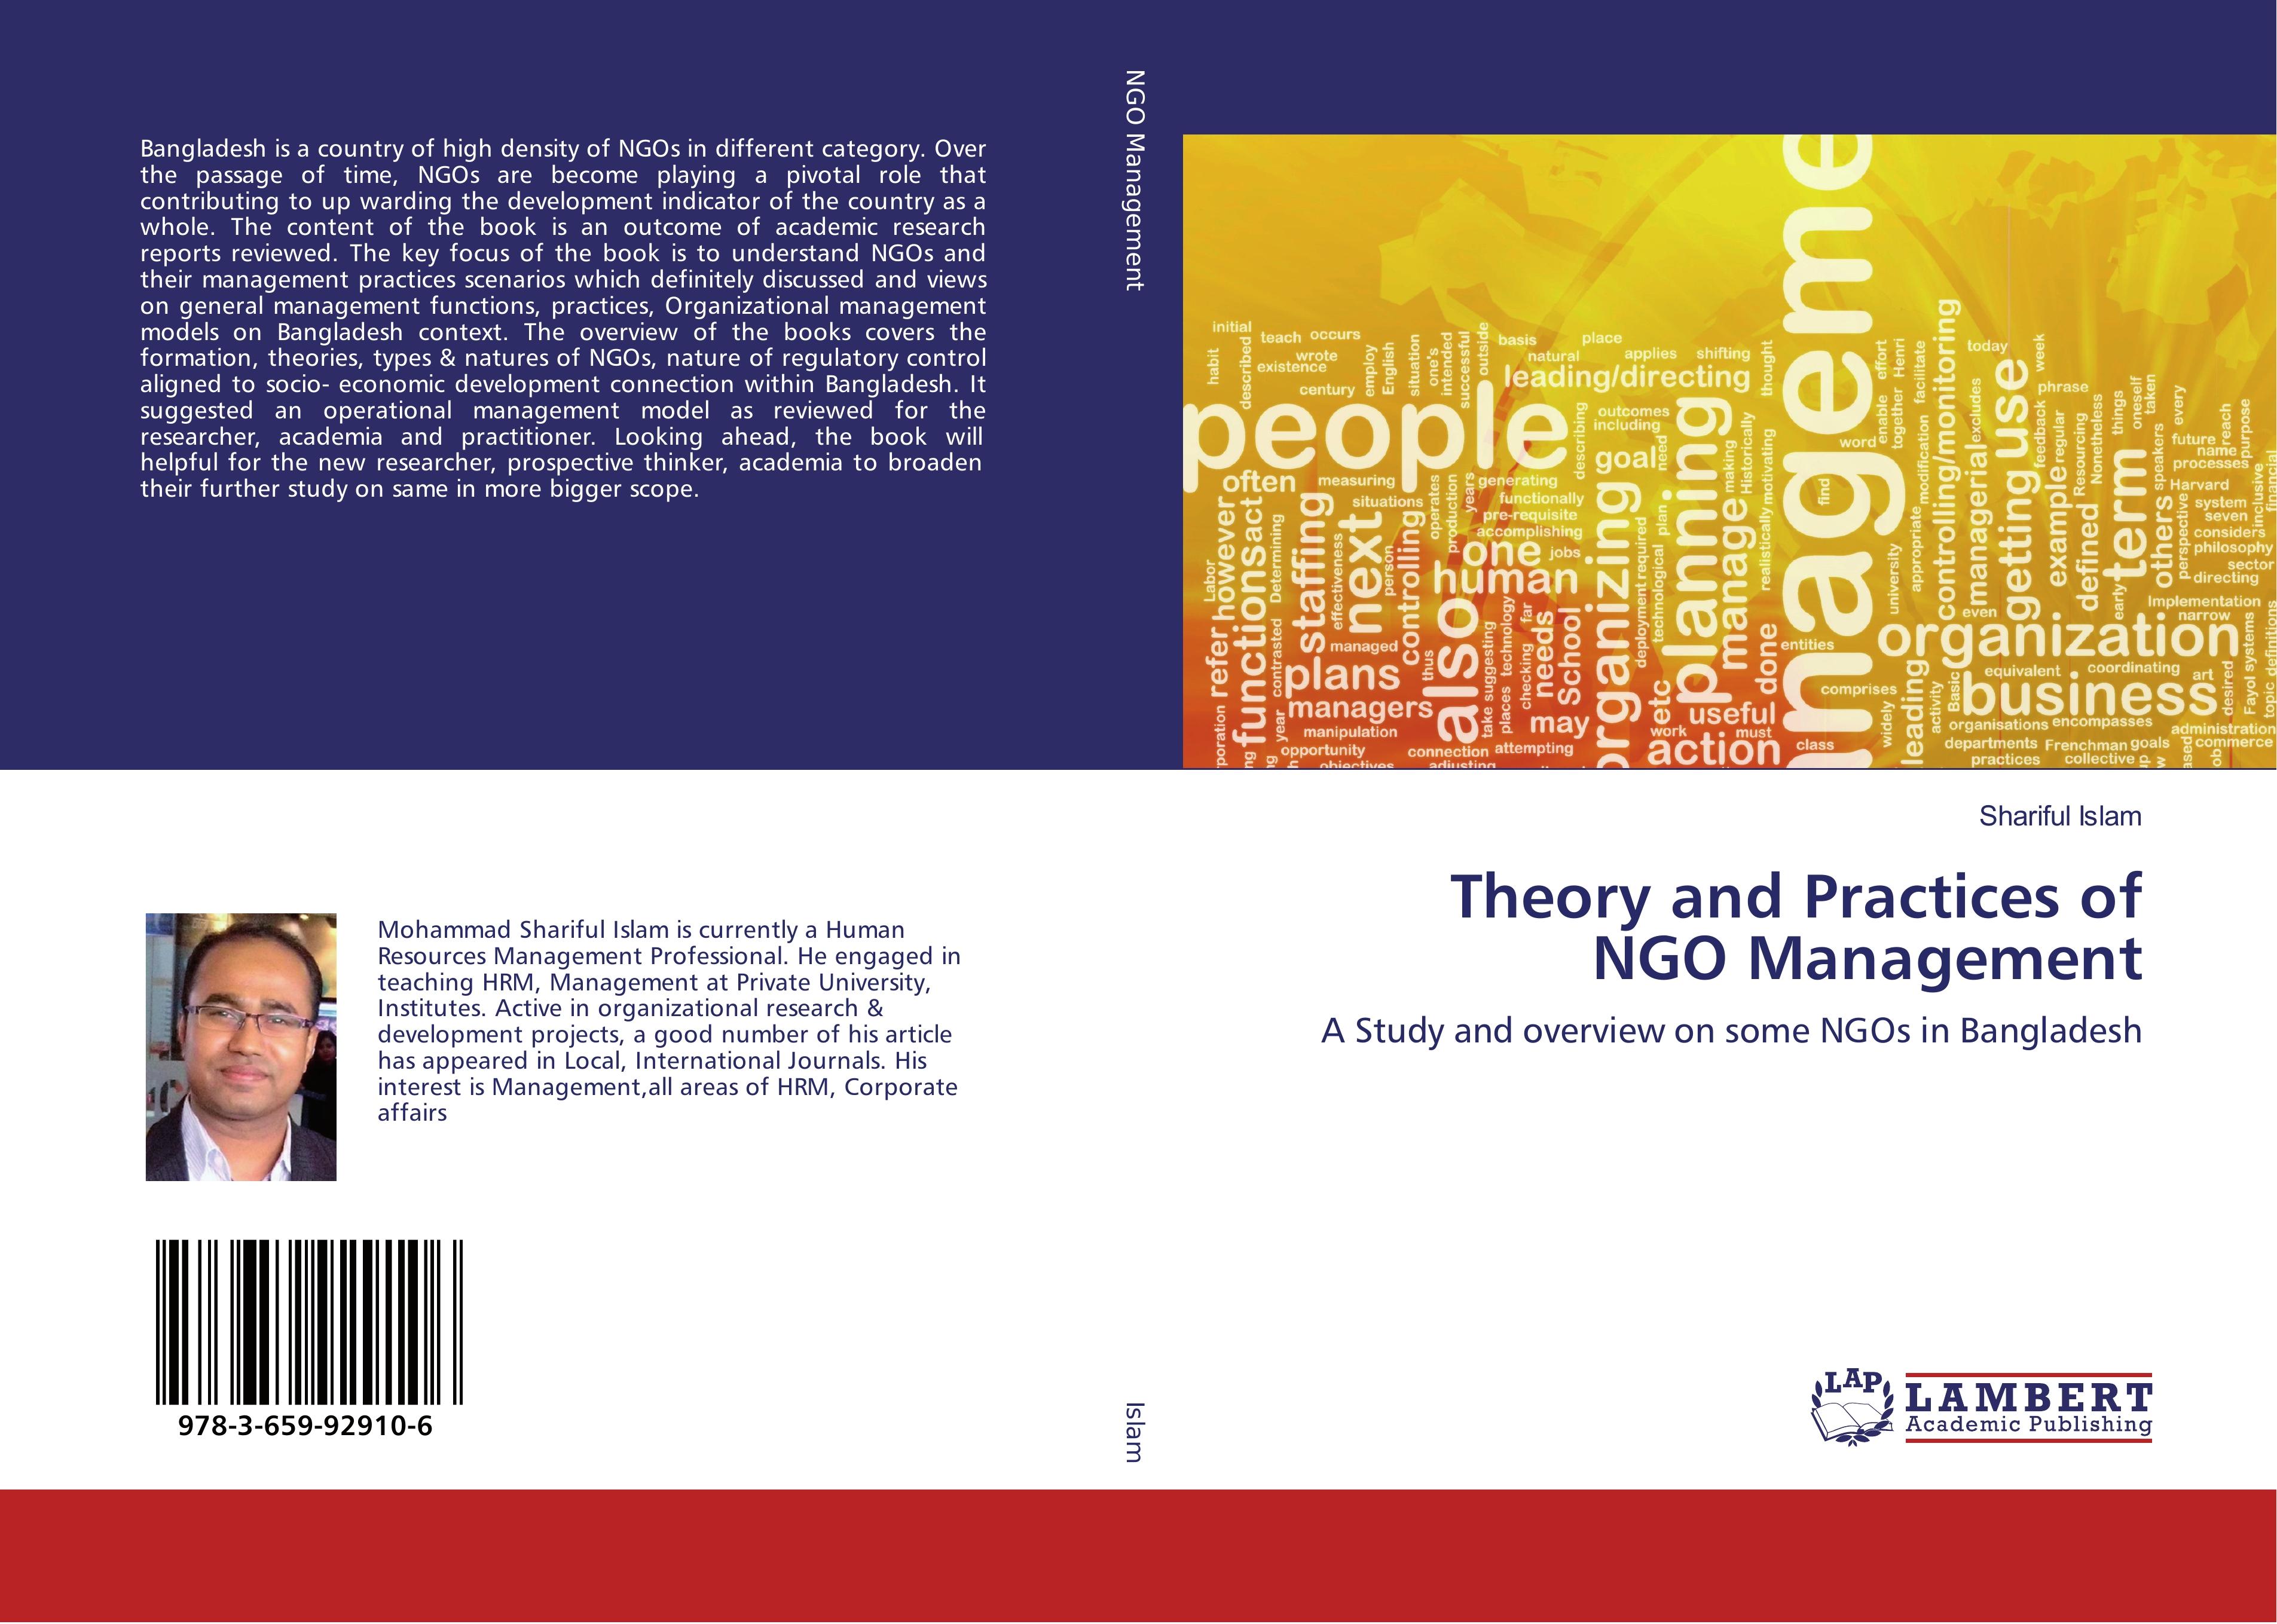 Theory and Practices of NGO Management - Shariful Islam